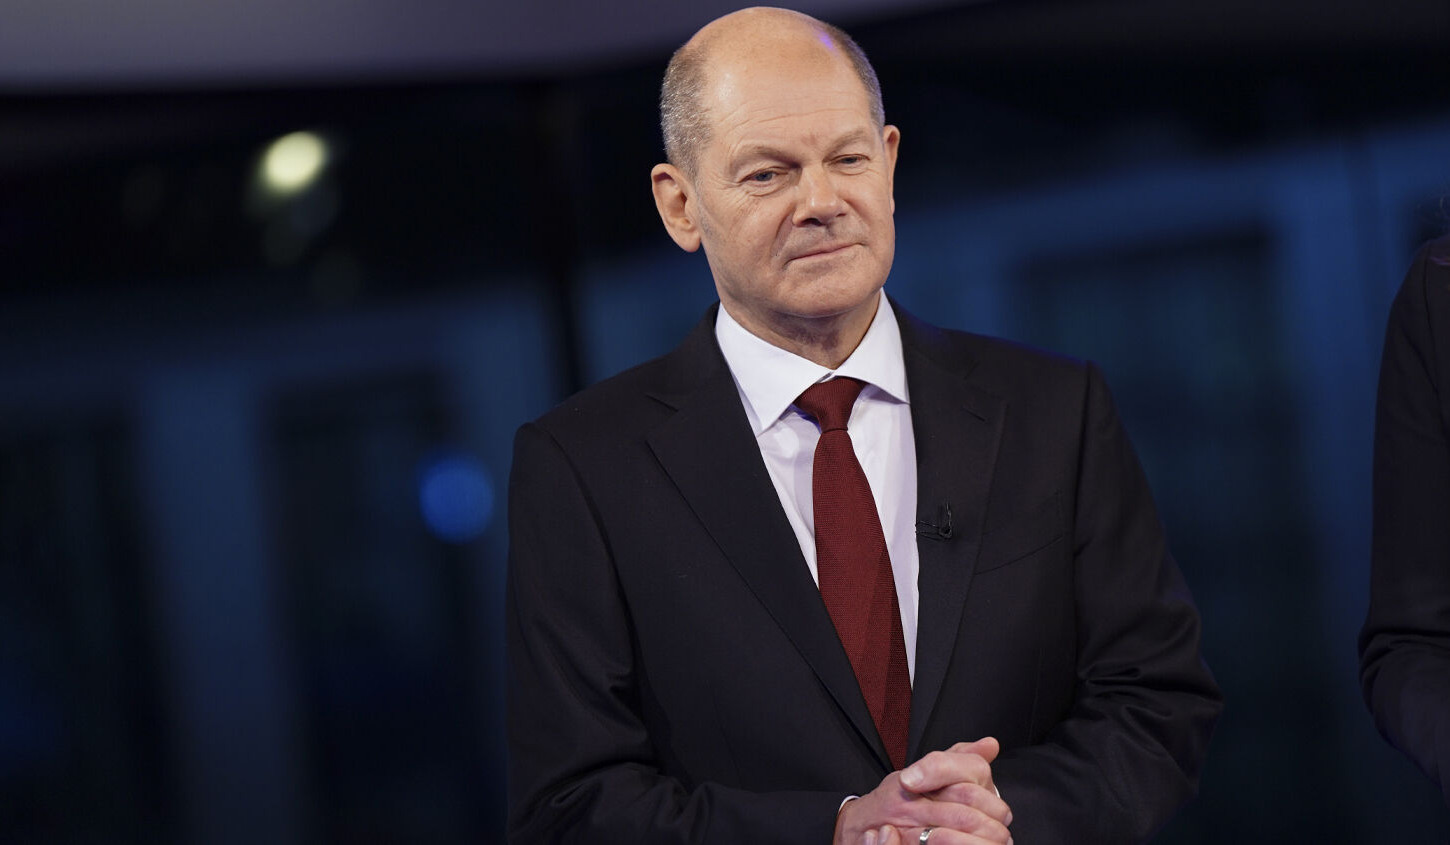 Scholz urged Zelensky to stop complaining about Germany's military aid: Focus